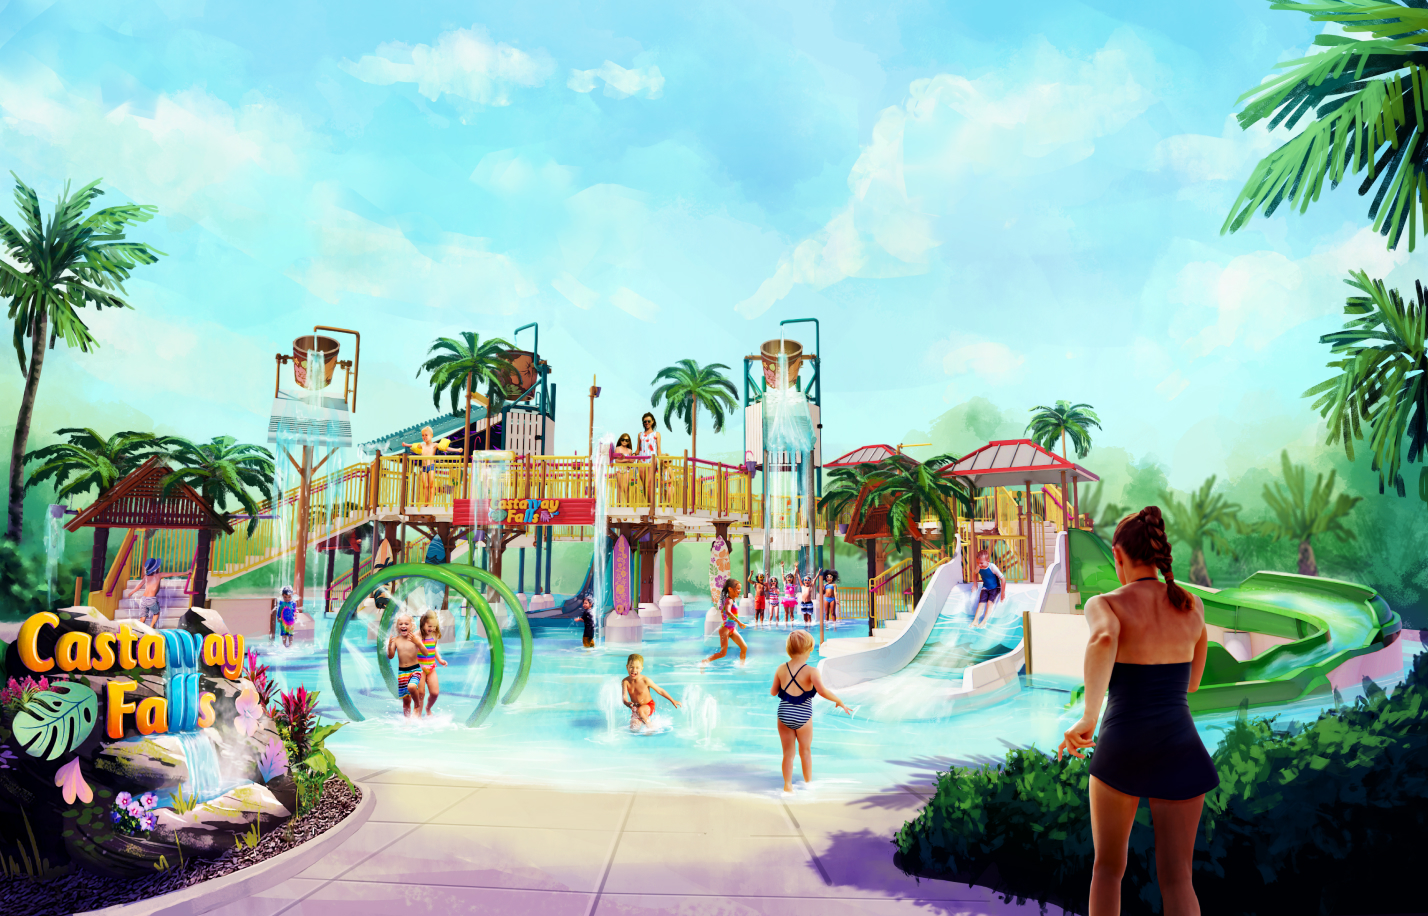 Here's everything you need for the best waterpark vacation